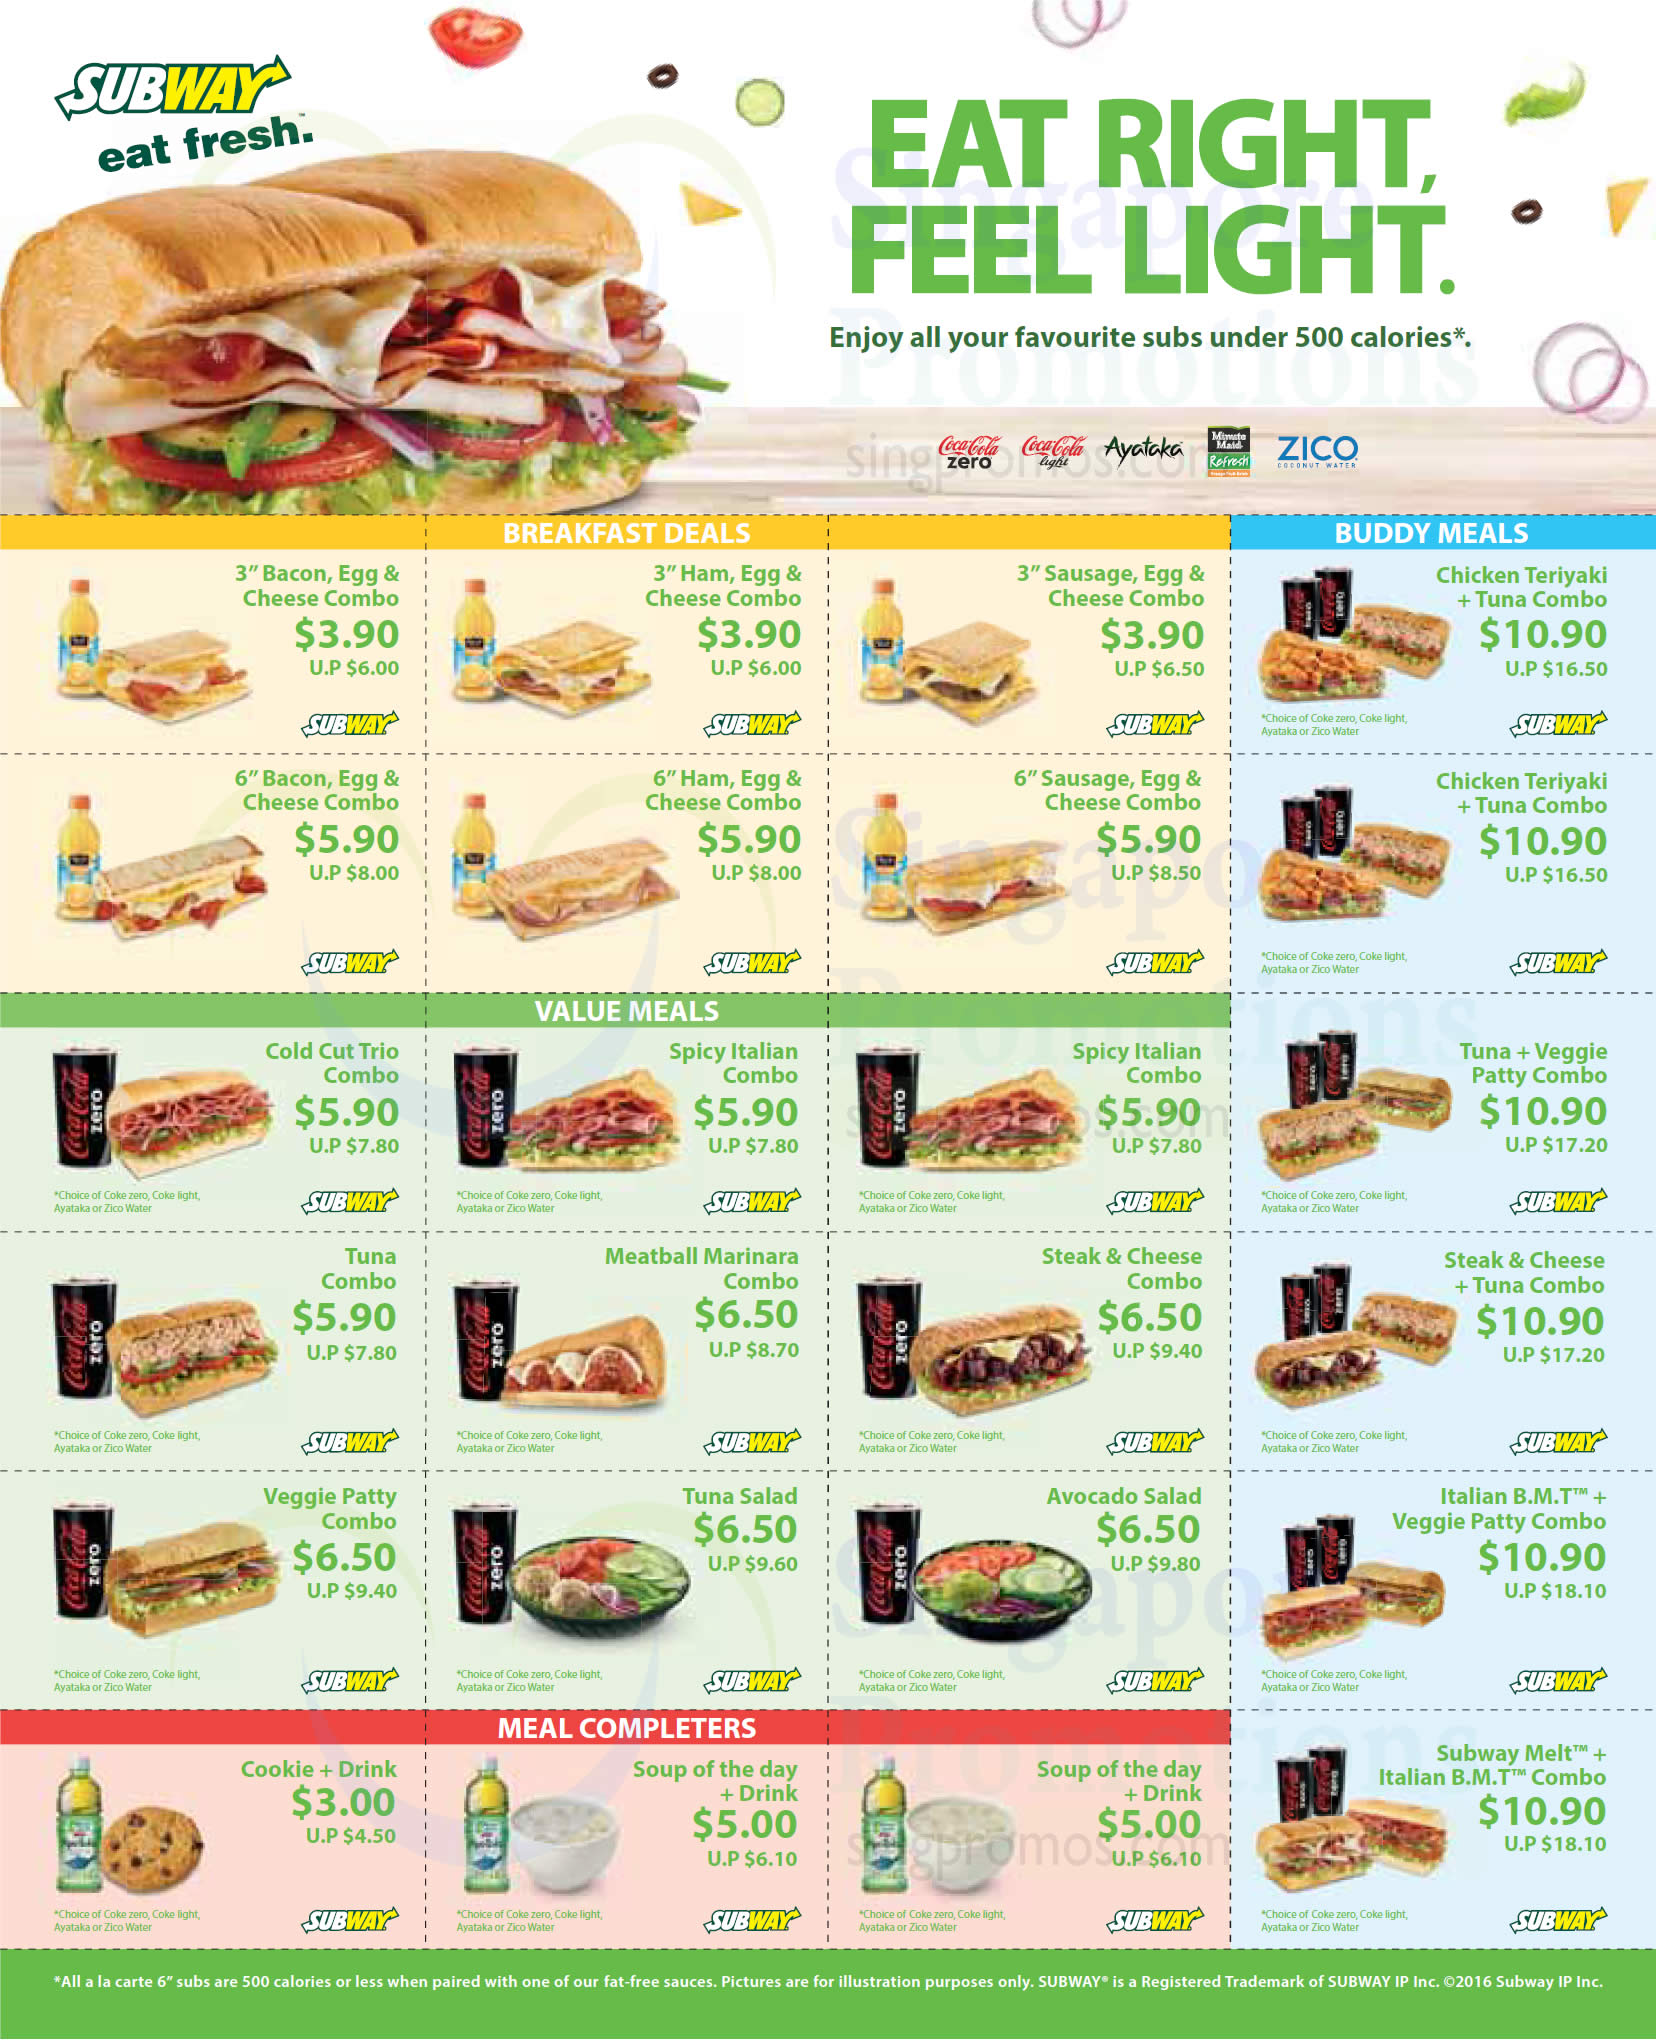 Subway's latest coupon deals let you save up to $7.20 from 4 Nov - 7 Dec 2016